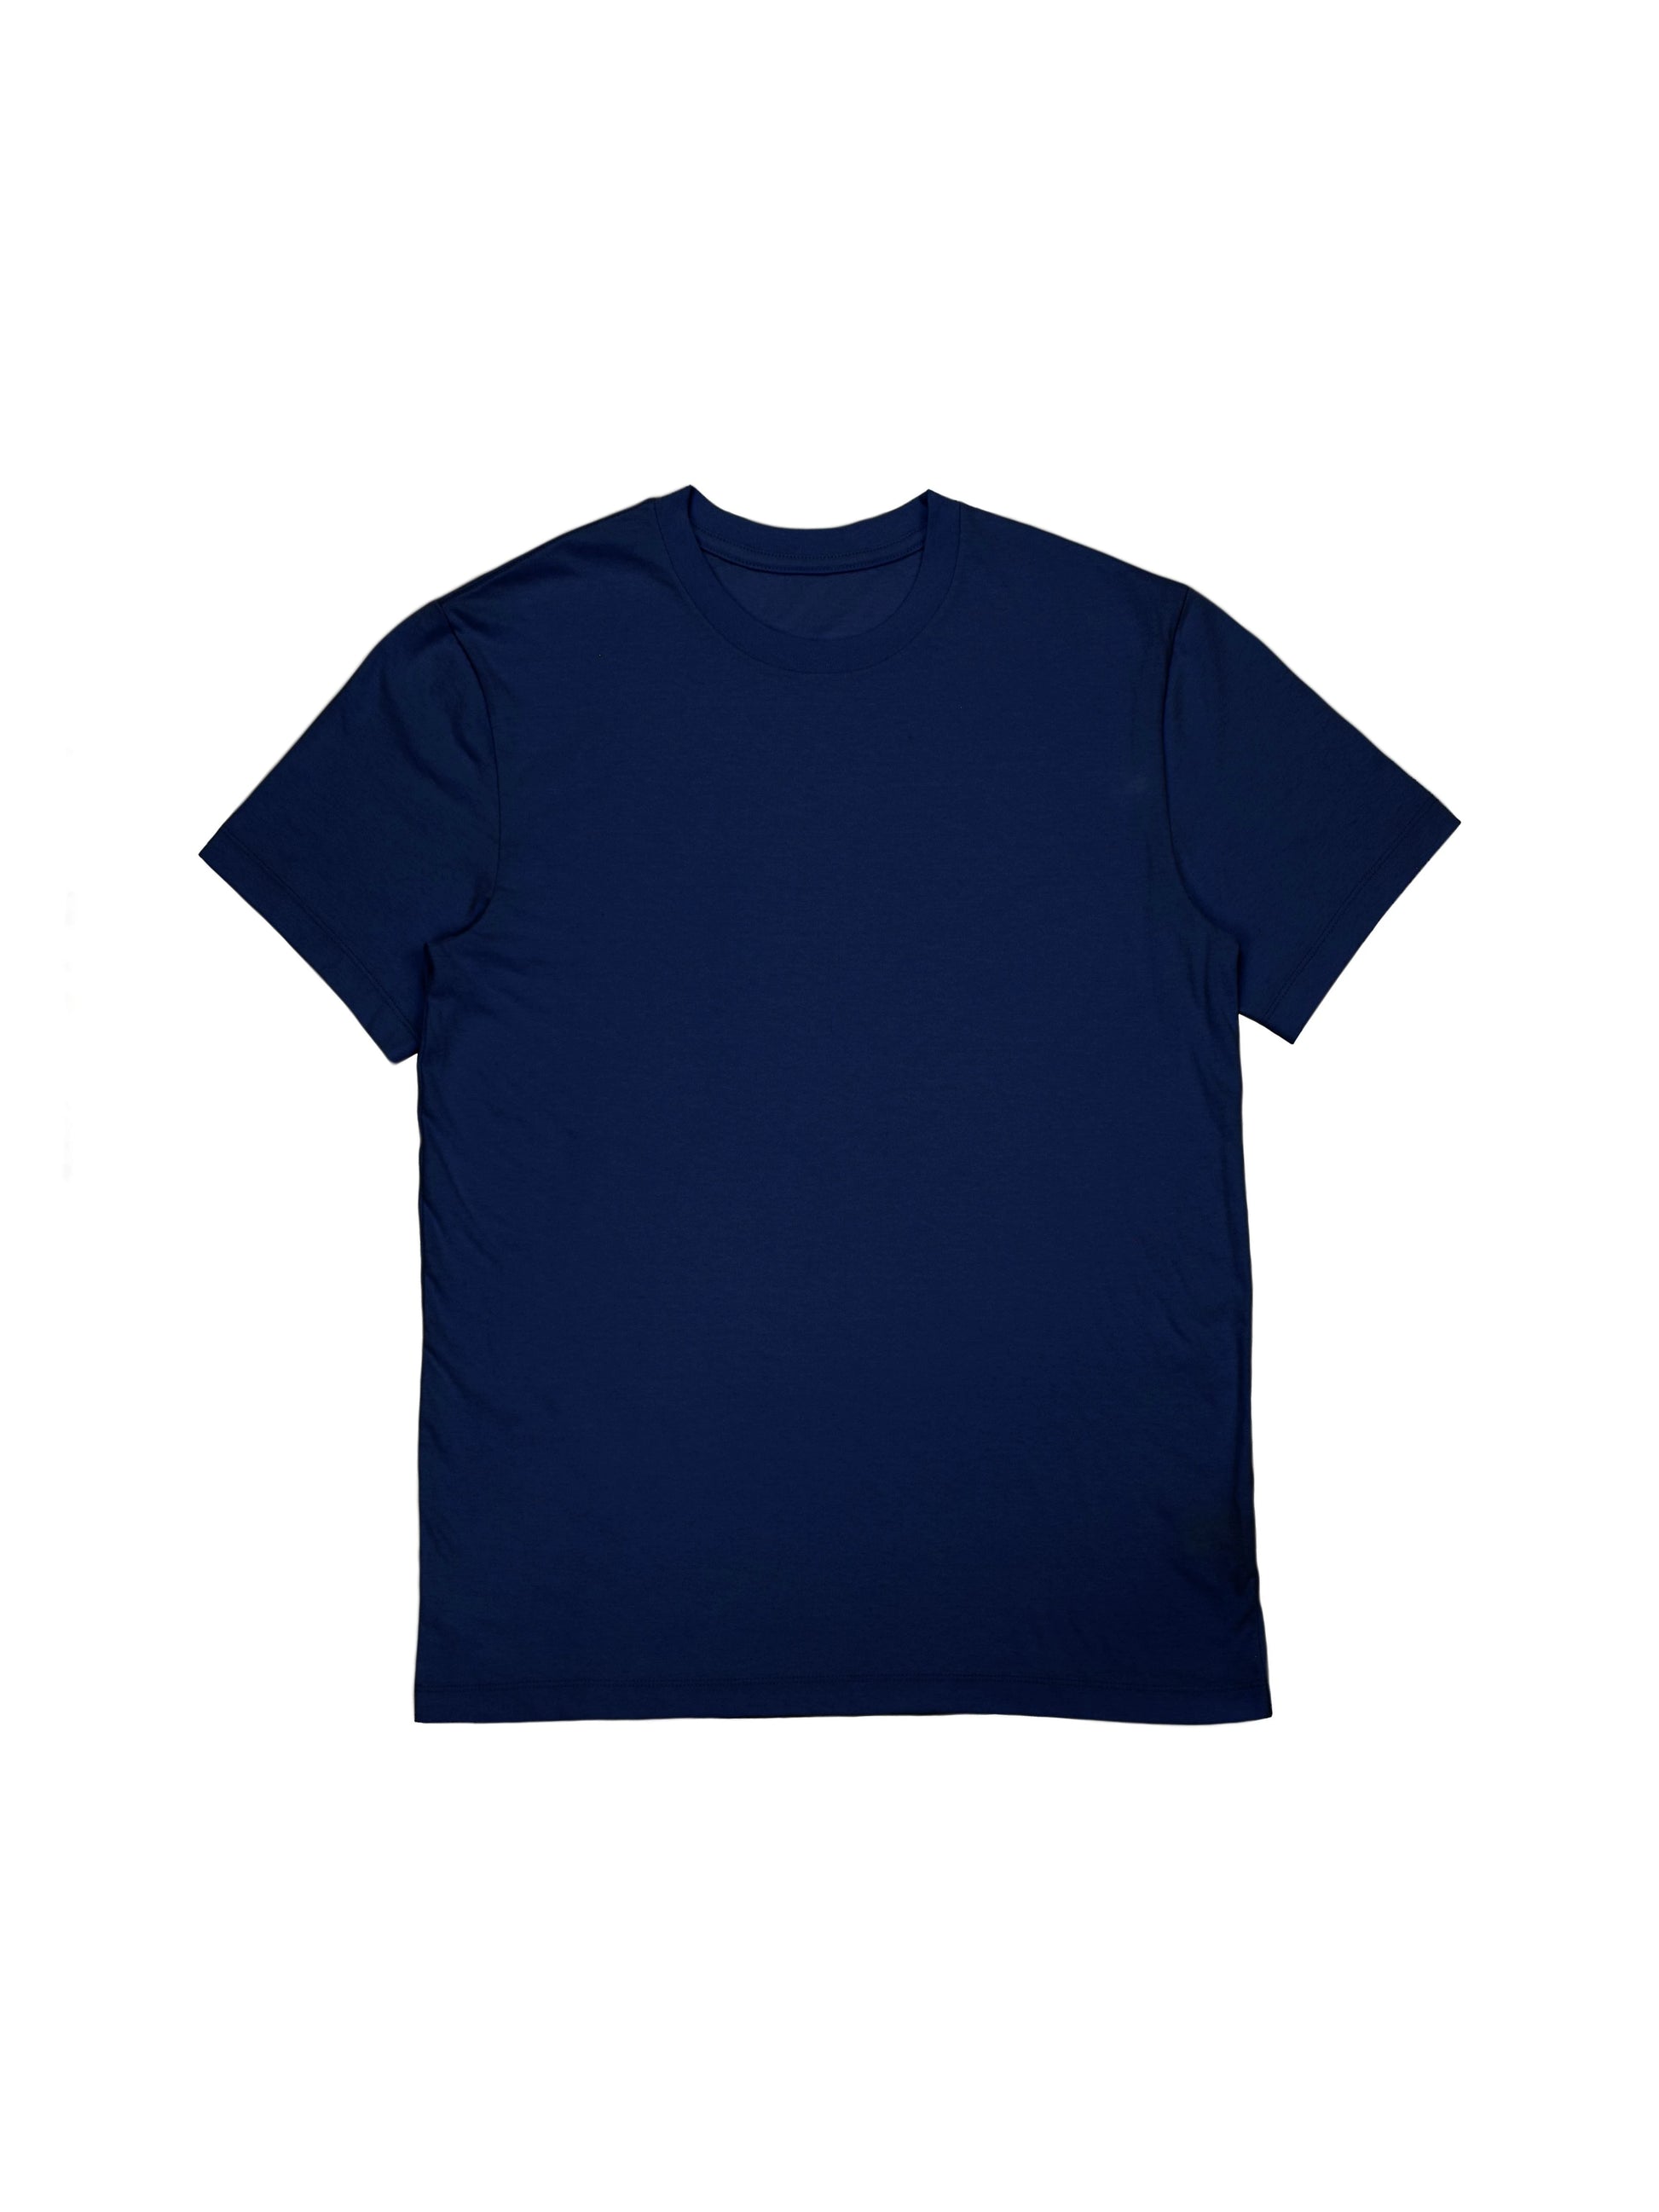 Boxy Fit Navy Blue T-Shirt - 100% Organic Cotton Made In Canada M